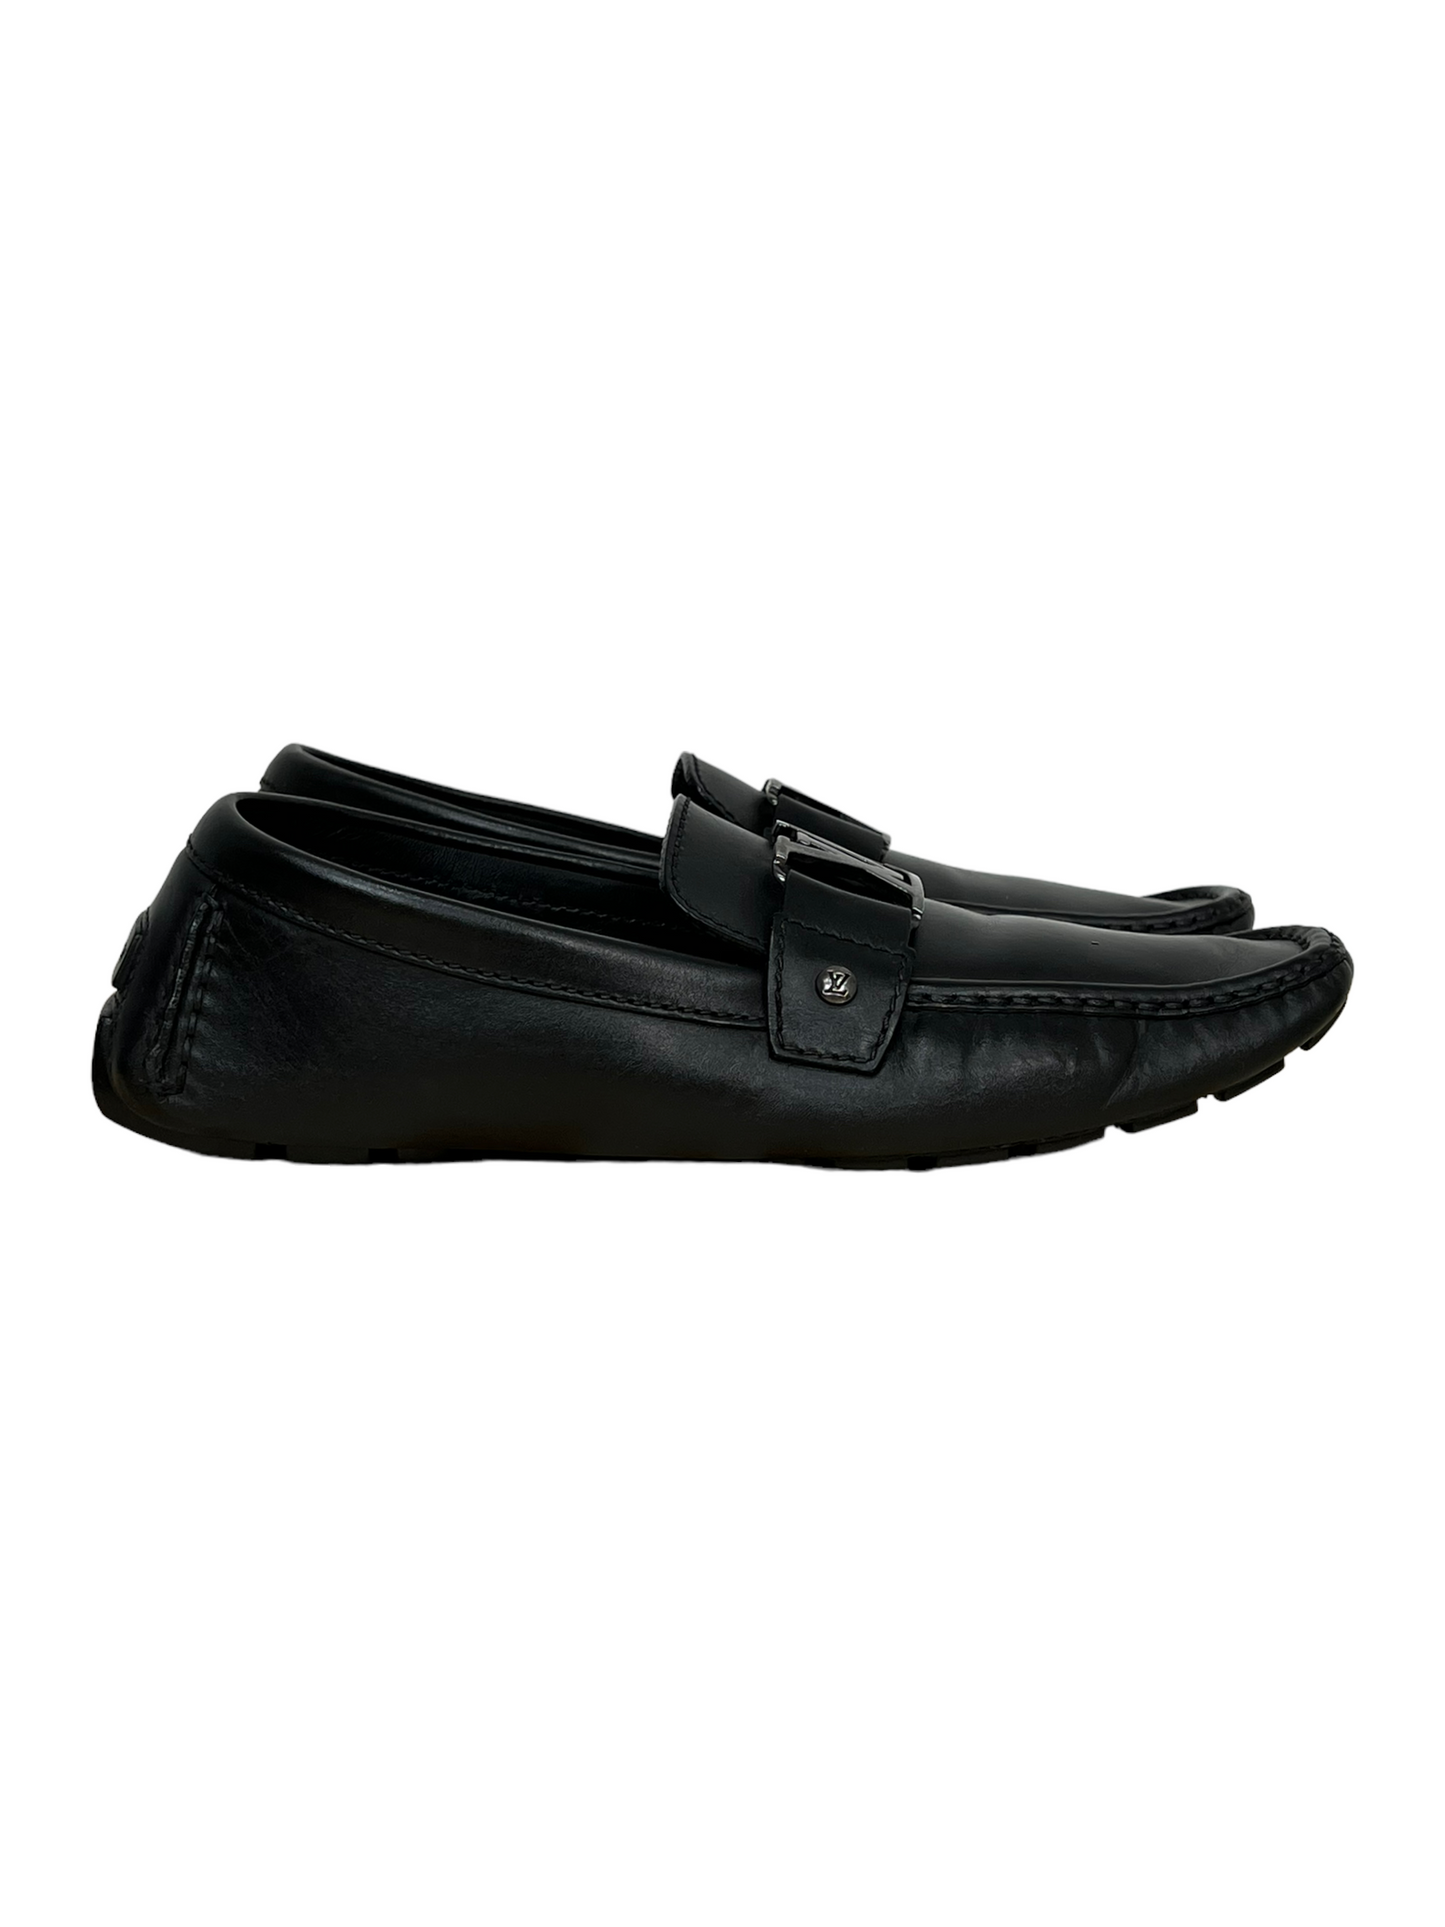 Louis Vuitton Black Leather Monte Carlo Loafers - Genuine Design Luxury Consignment for Men. New & Pre-Owned Clothing, Shoes, & Accessories. Calgary, Canada